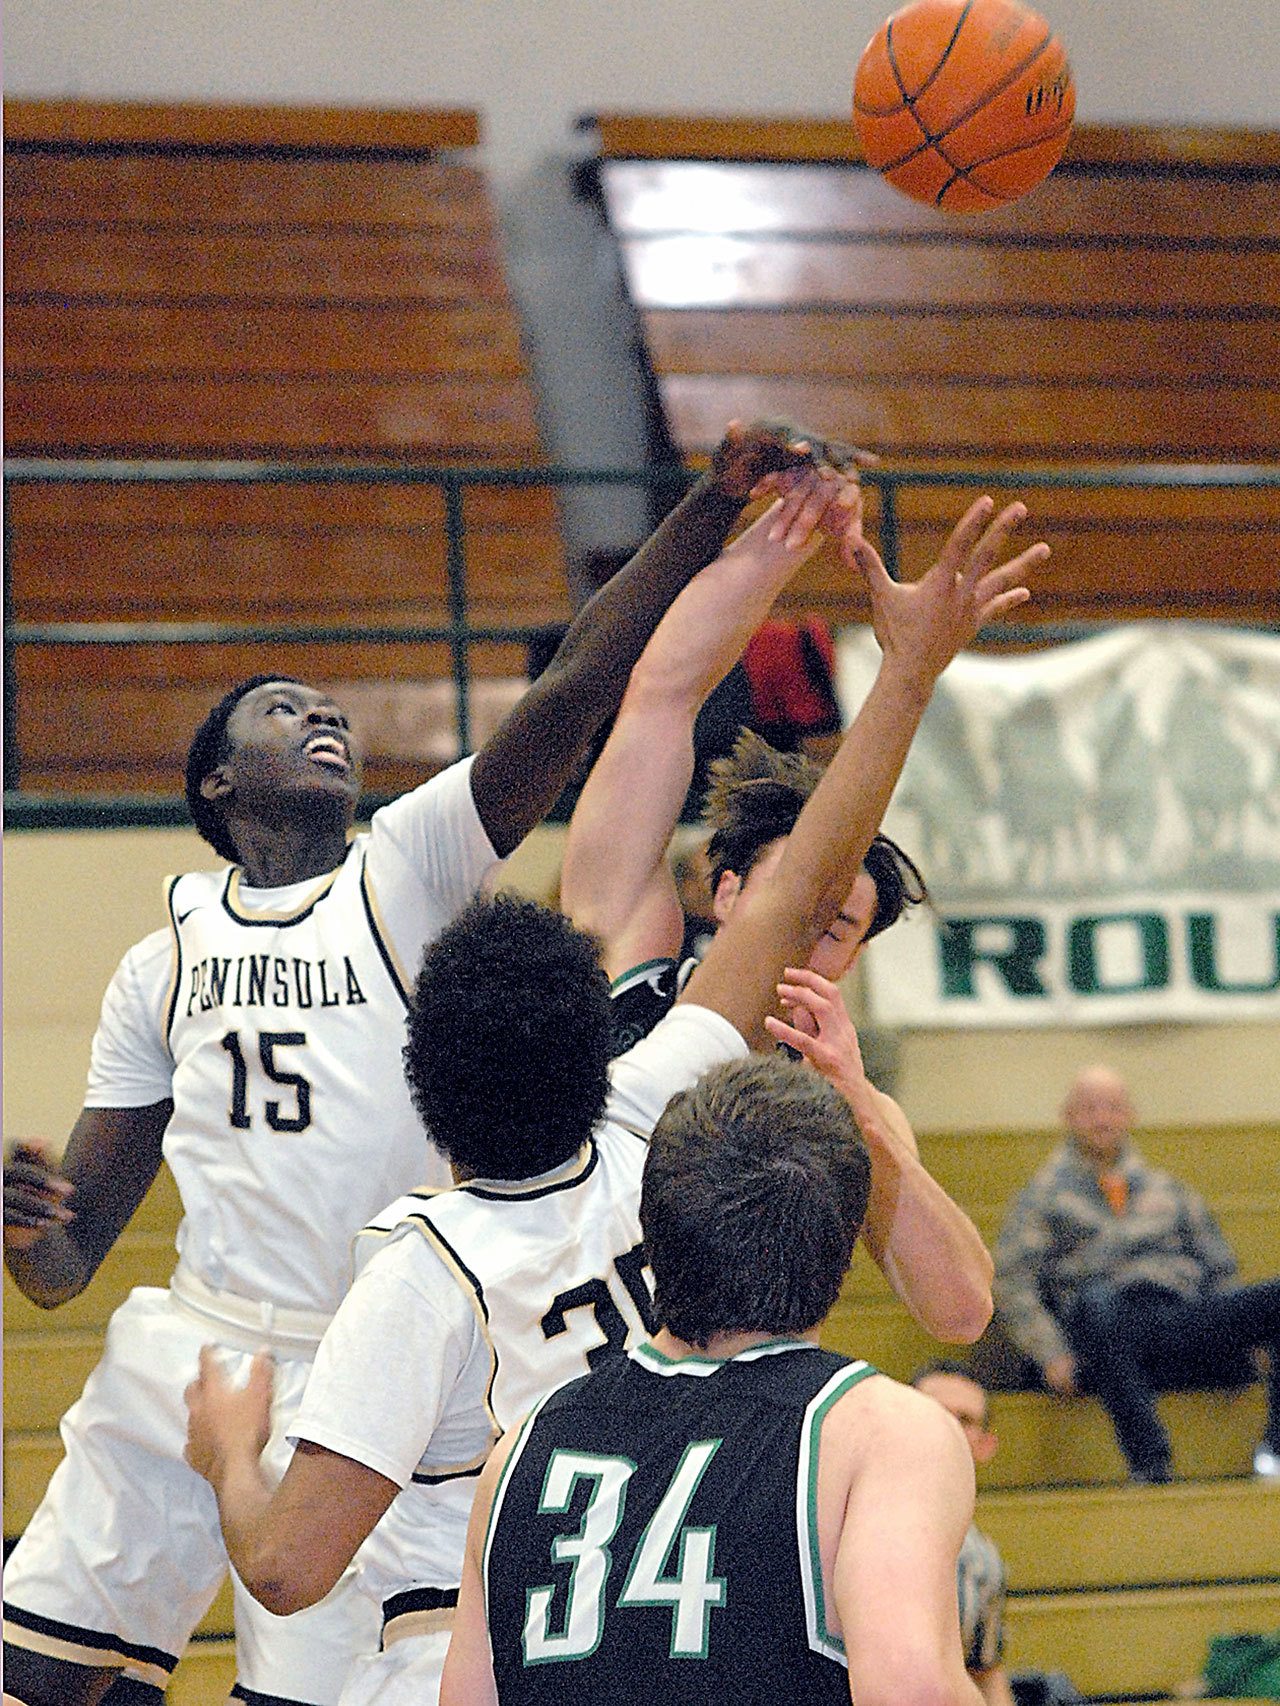 Keith Thorpe/Peninsula Daily News Peninsula’s Omar Lo, left and Sam Velez, center, vie for a rebound with Shoreline’s Ben Steinbrueck as Shoreline’s Jacob Perkins, front, looks on during the second quarter on Wednesday at Port Angeles High School.